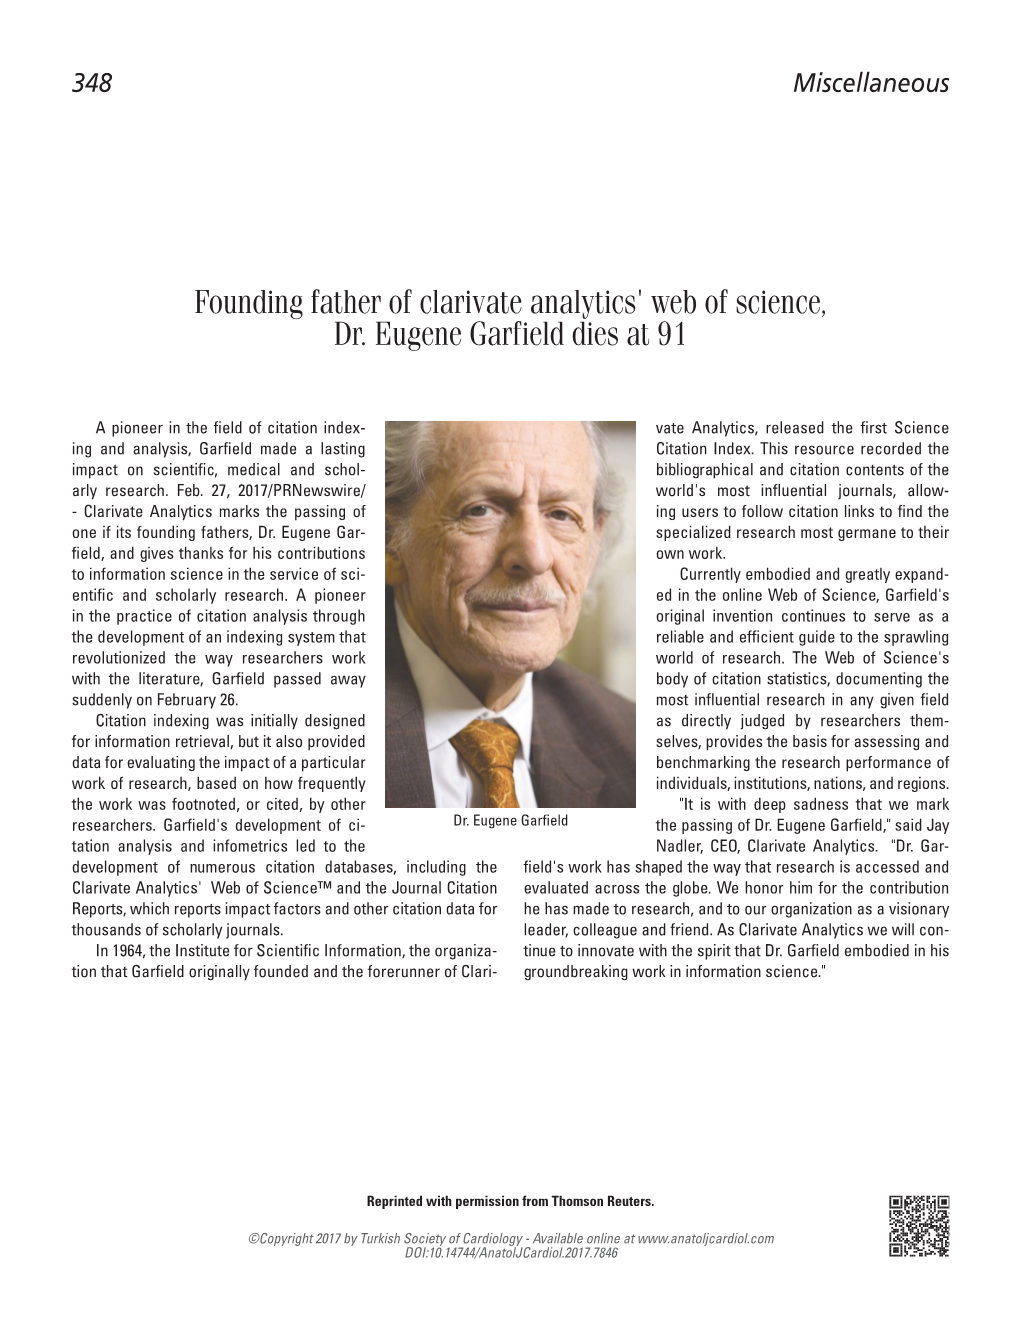 Founding Father of Clarivate Analytics' Web of Science, Dr. Eugene Garfield Dies at 91